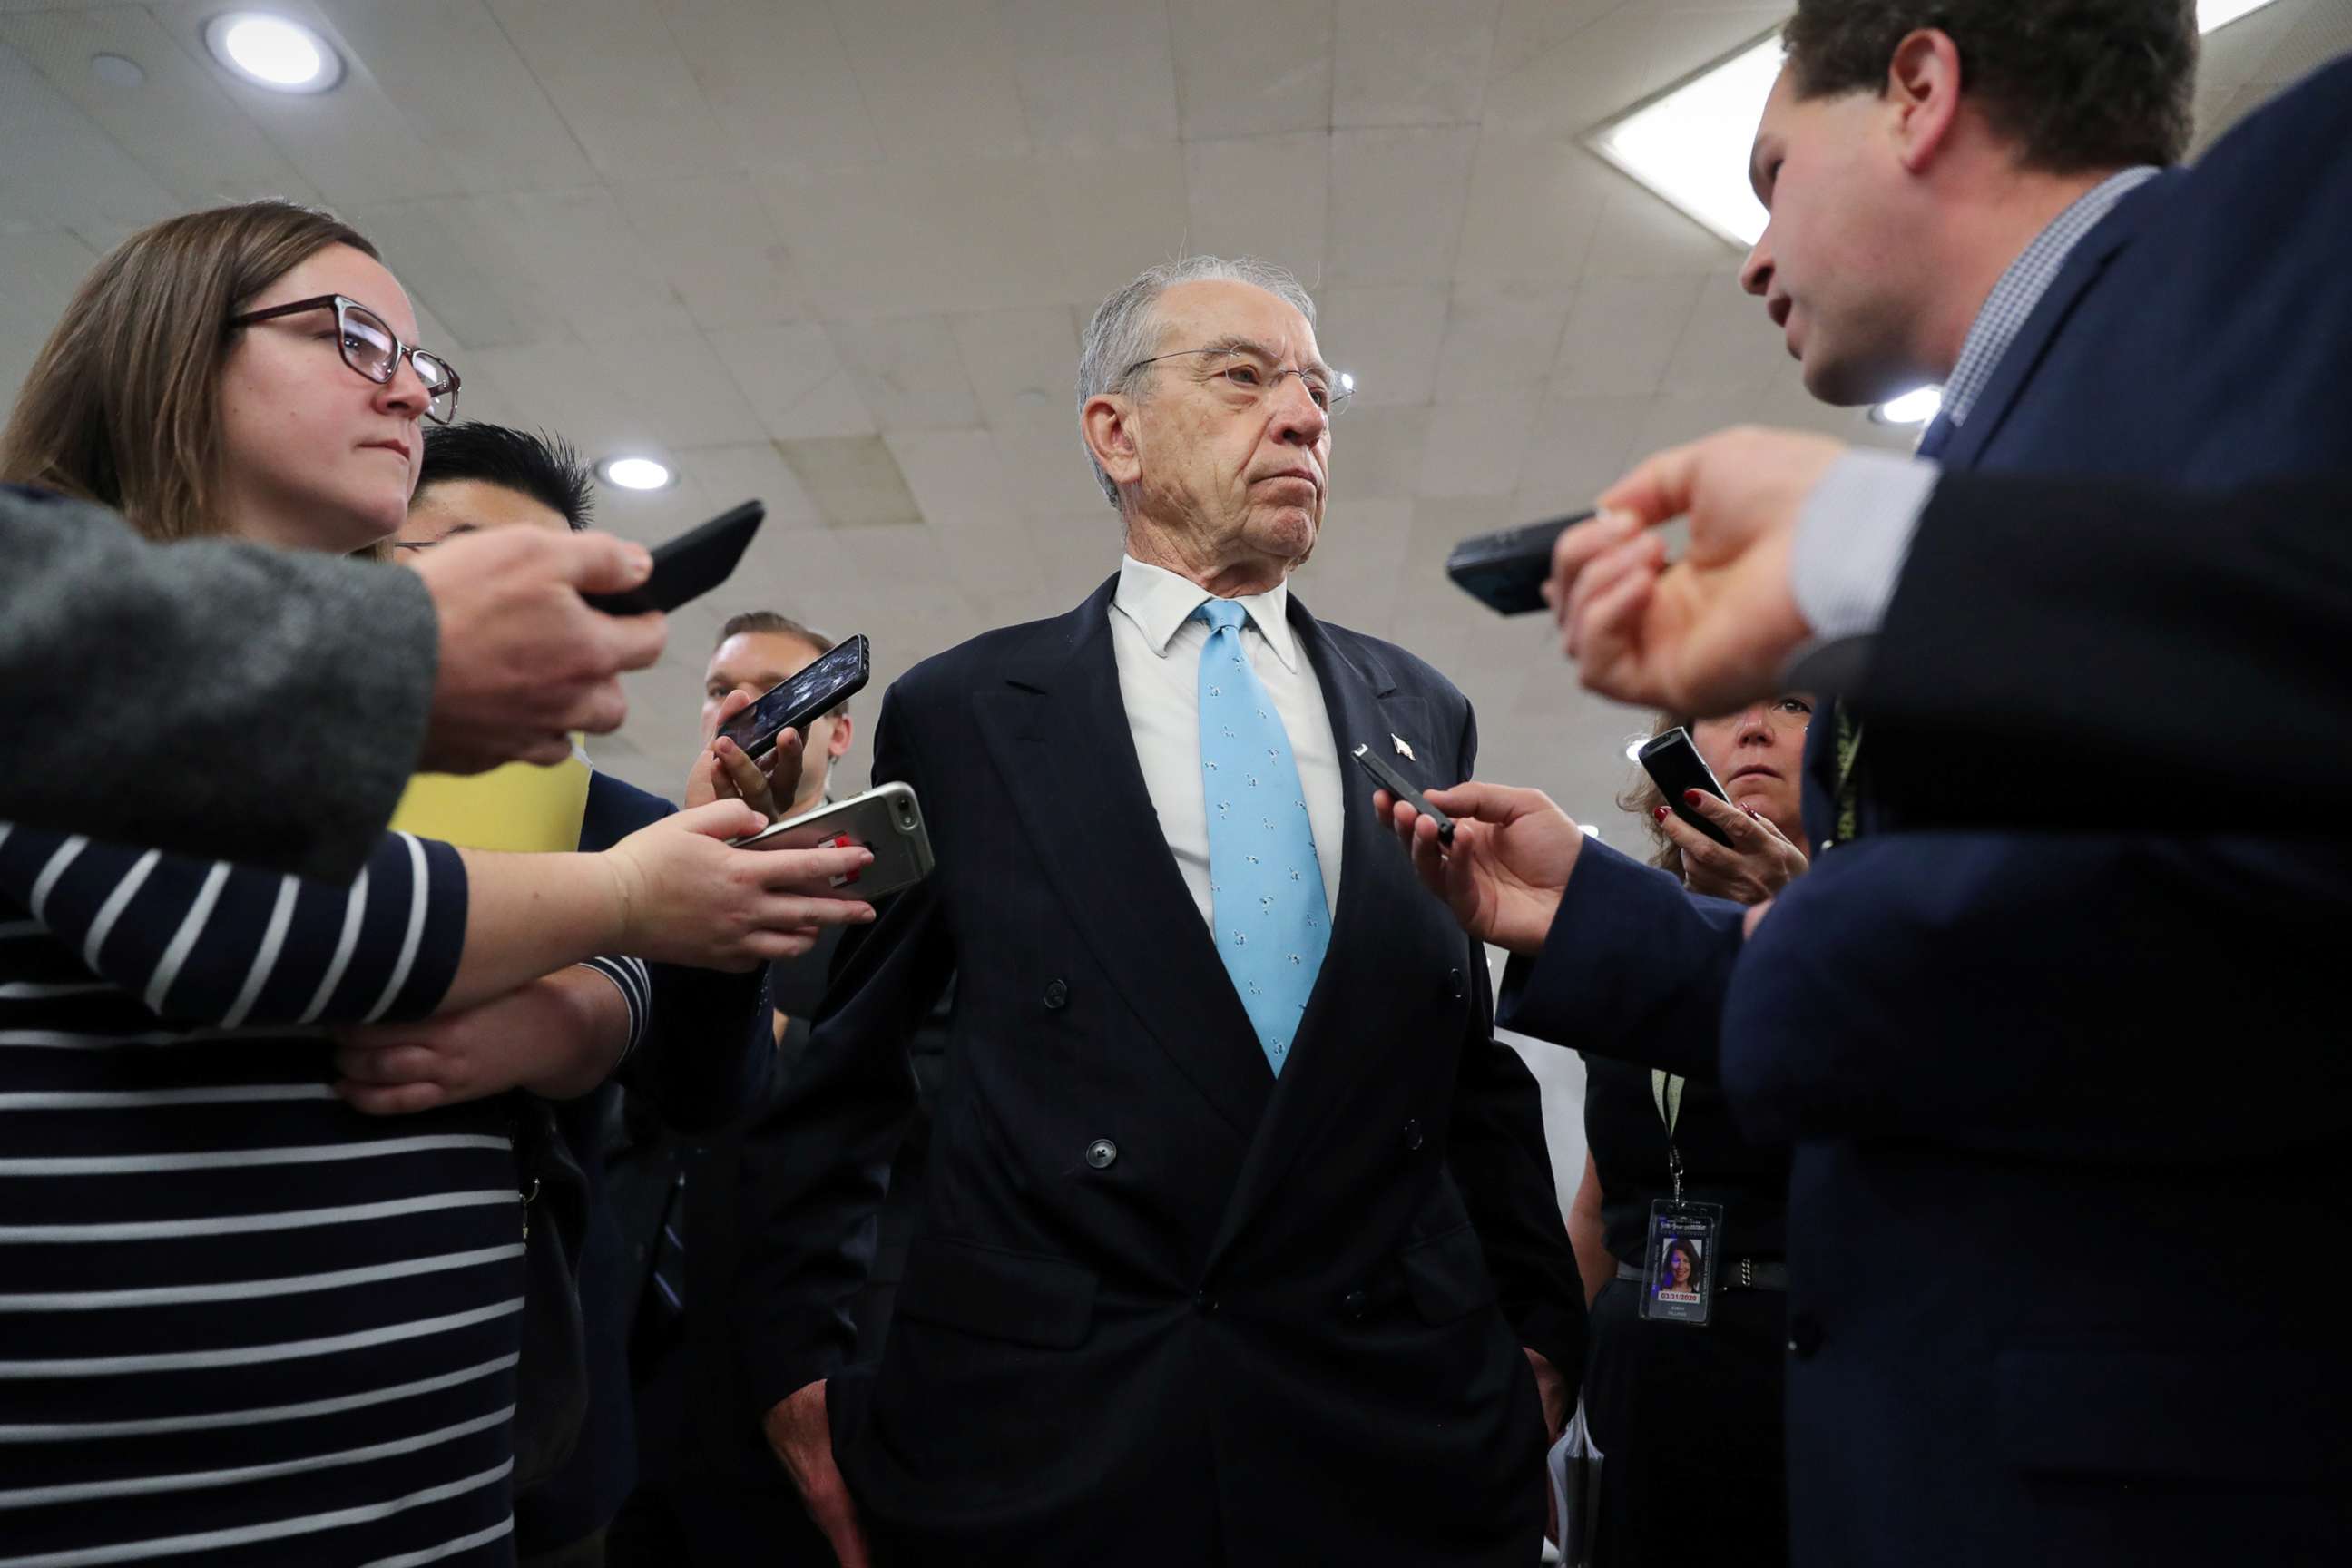 PHOTO: Senator Chuck Grassley speaks to reporters on his way from the Senate floor after a vote at the U.S. Capitol in Washington, May 14, 2019.